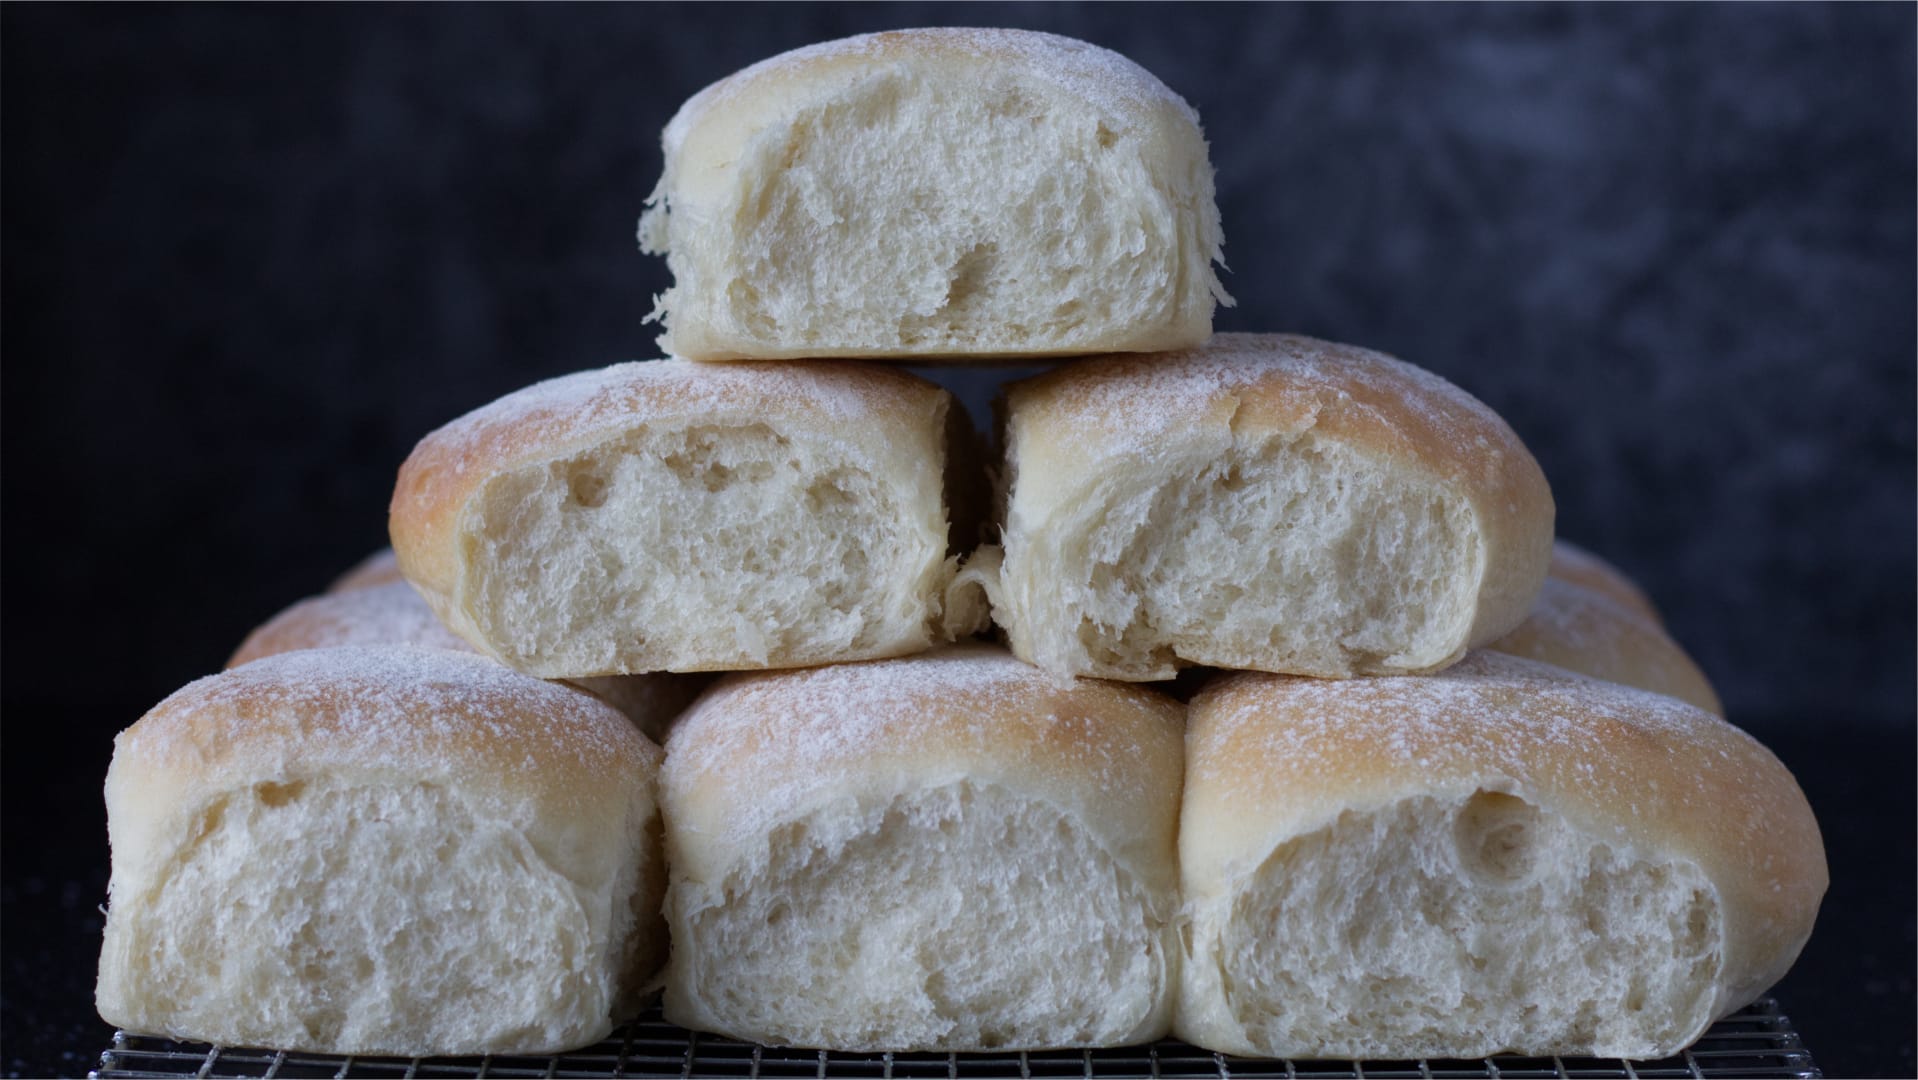 Freshness Guaranteed Yeasty Dinner Rolls, 16 oz, 12 Count 